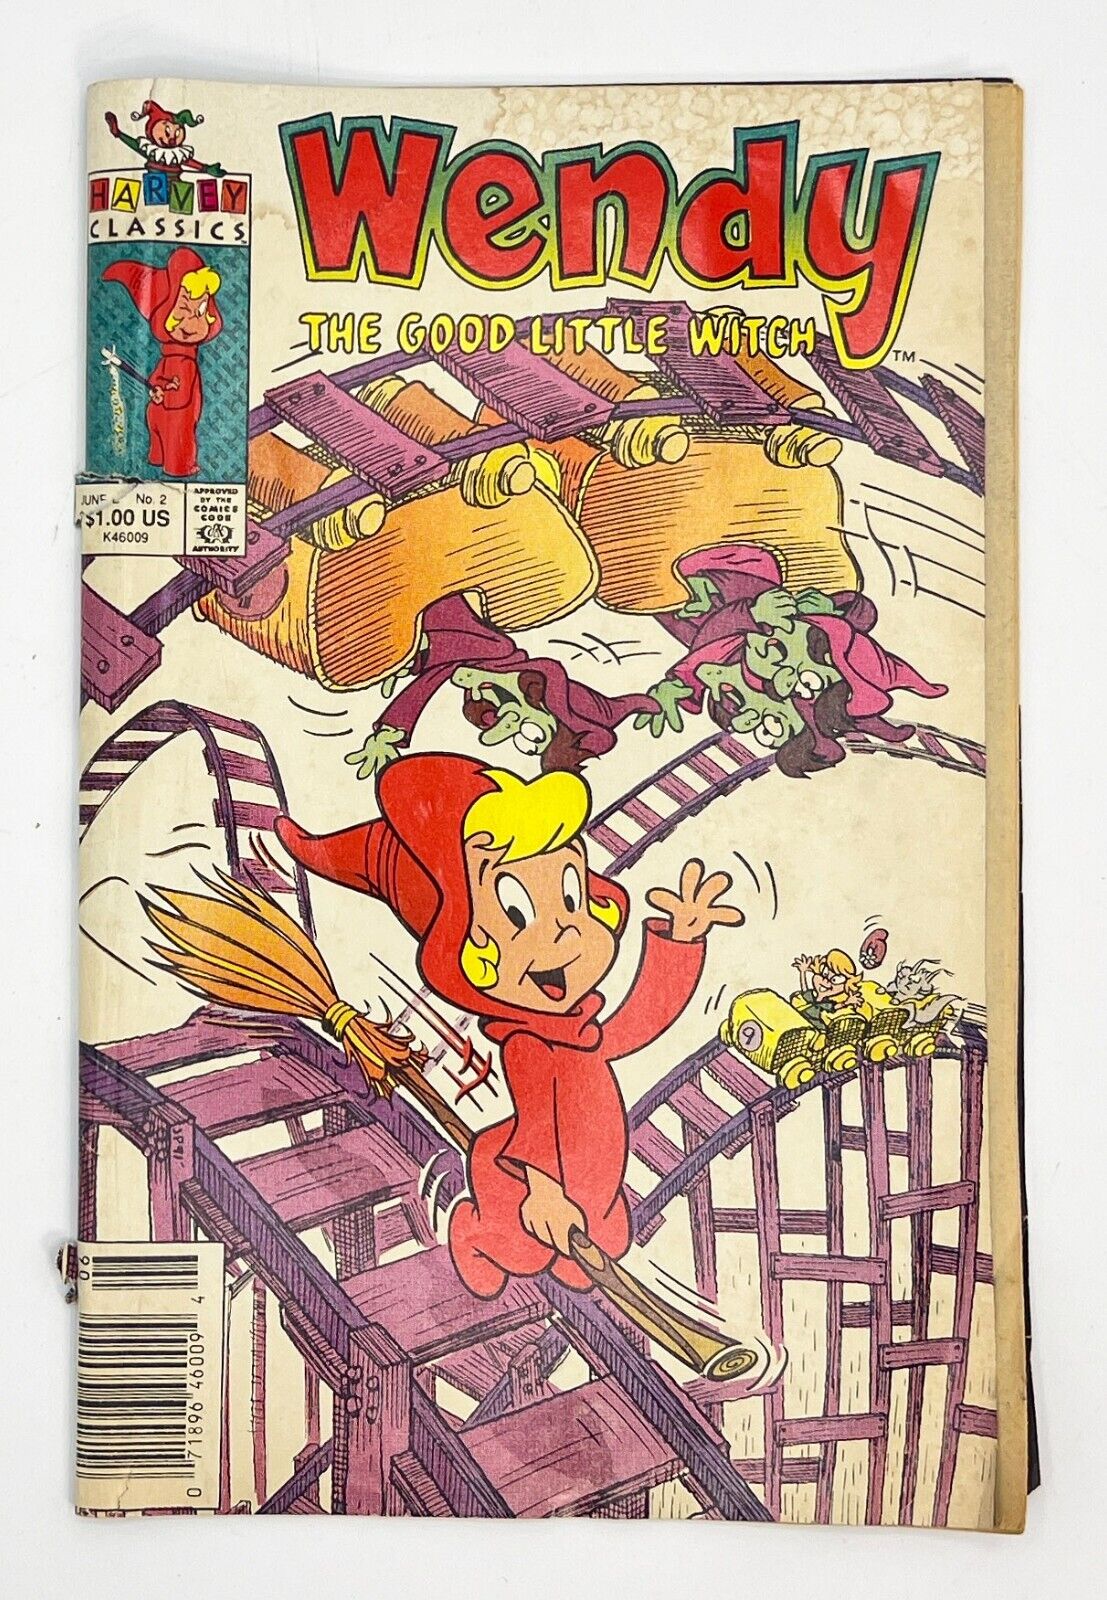 Wendy the Good Little Witch Vol. 2 No. 2, June 1991 Harvey Classics